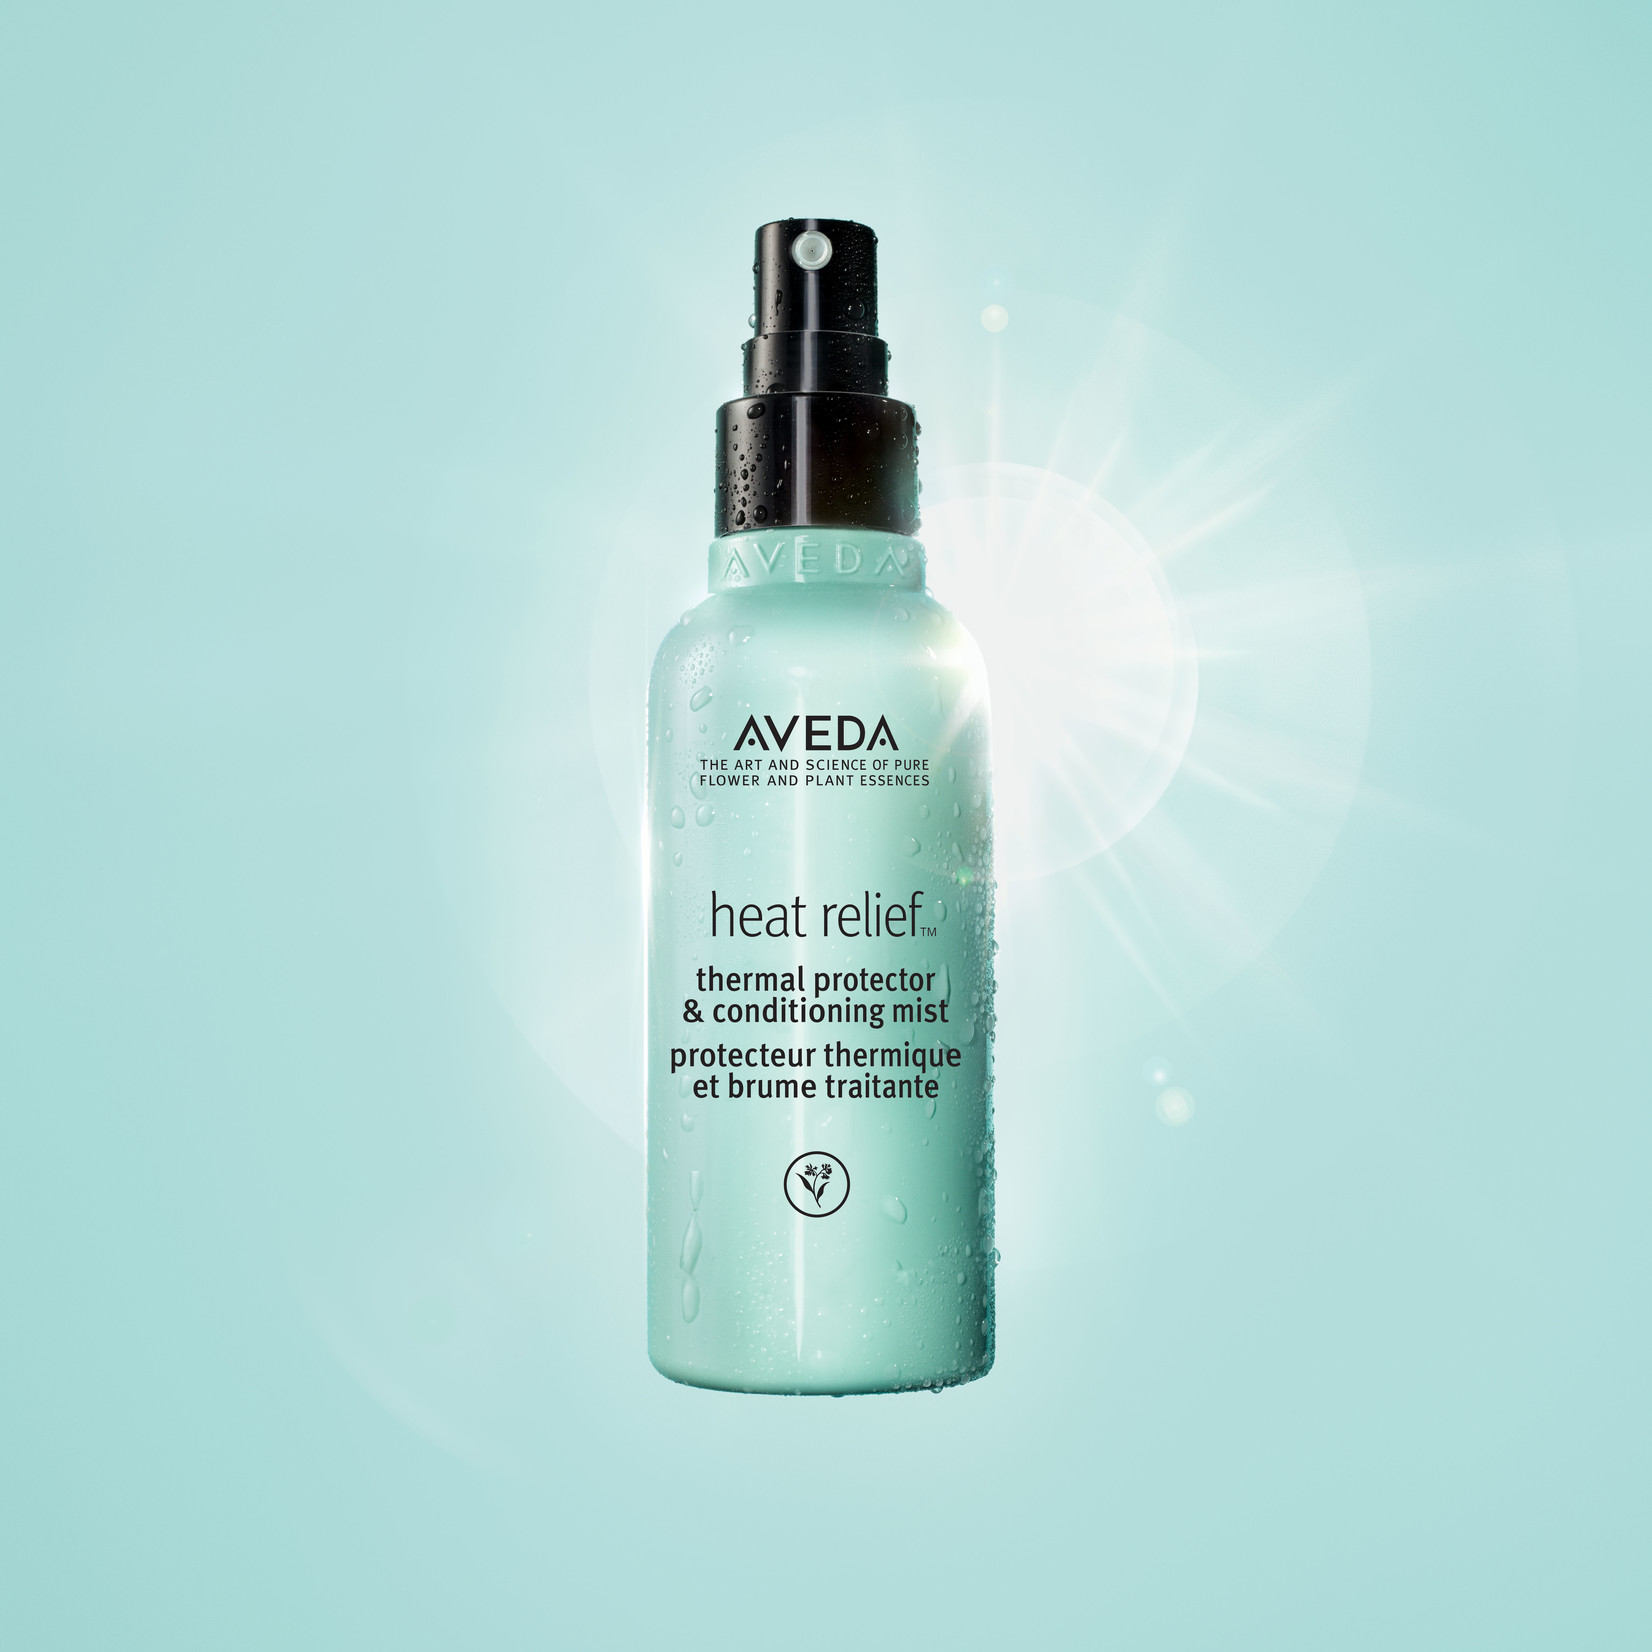 AVEDA Heat Relief™ Thermal Protector & Conditioning Mist